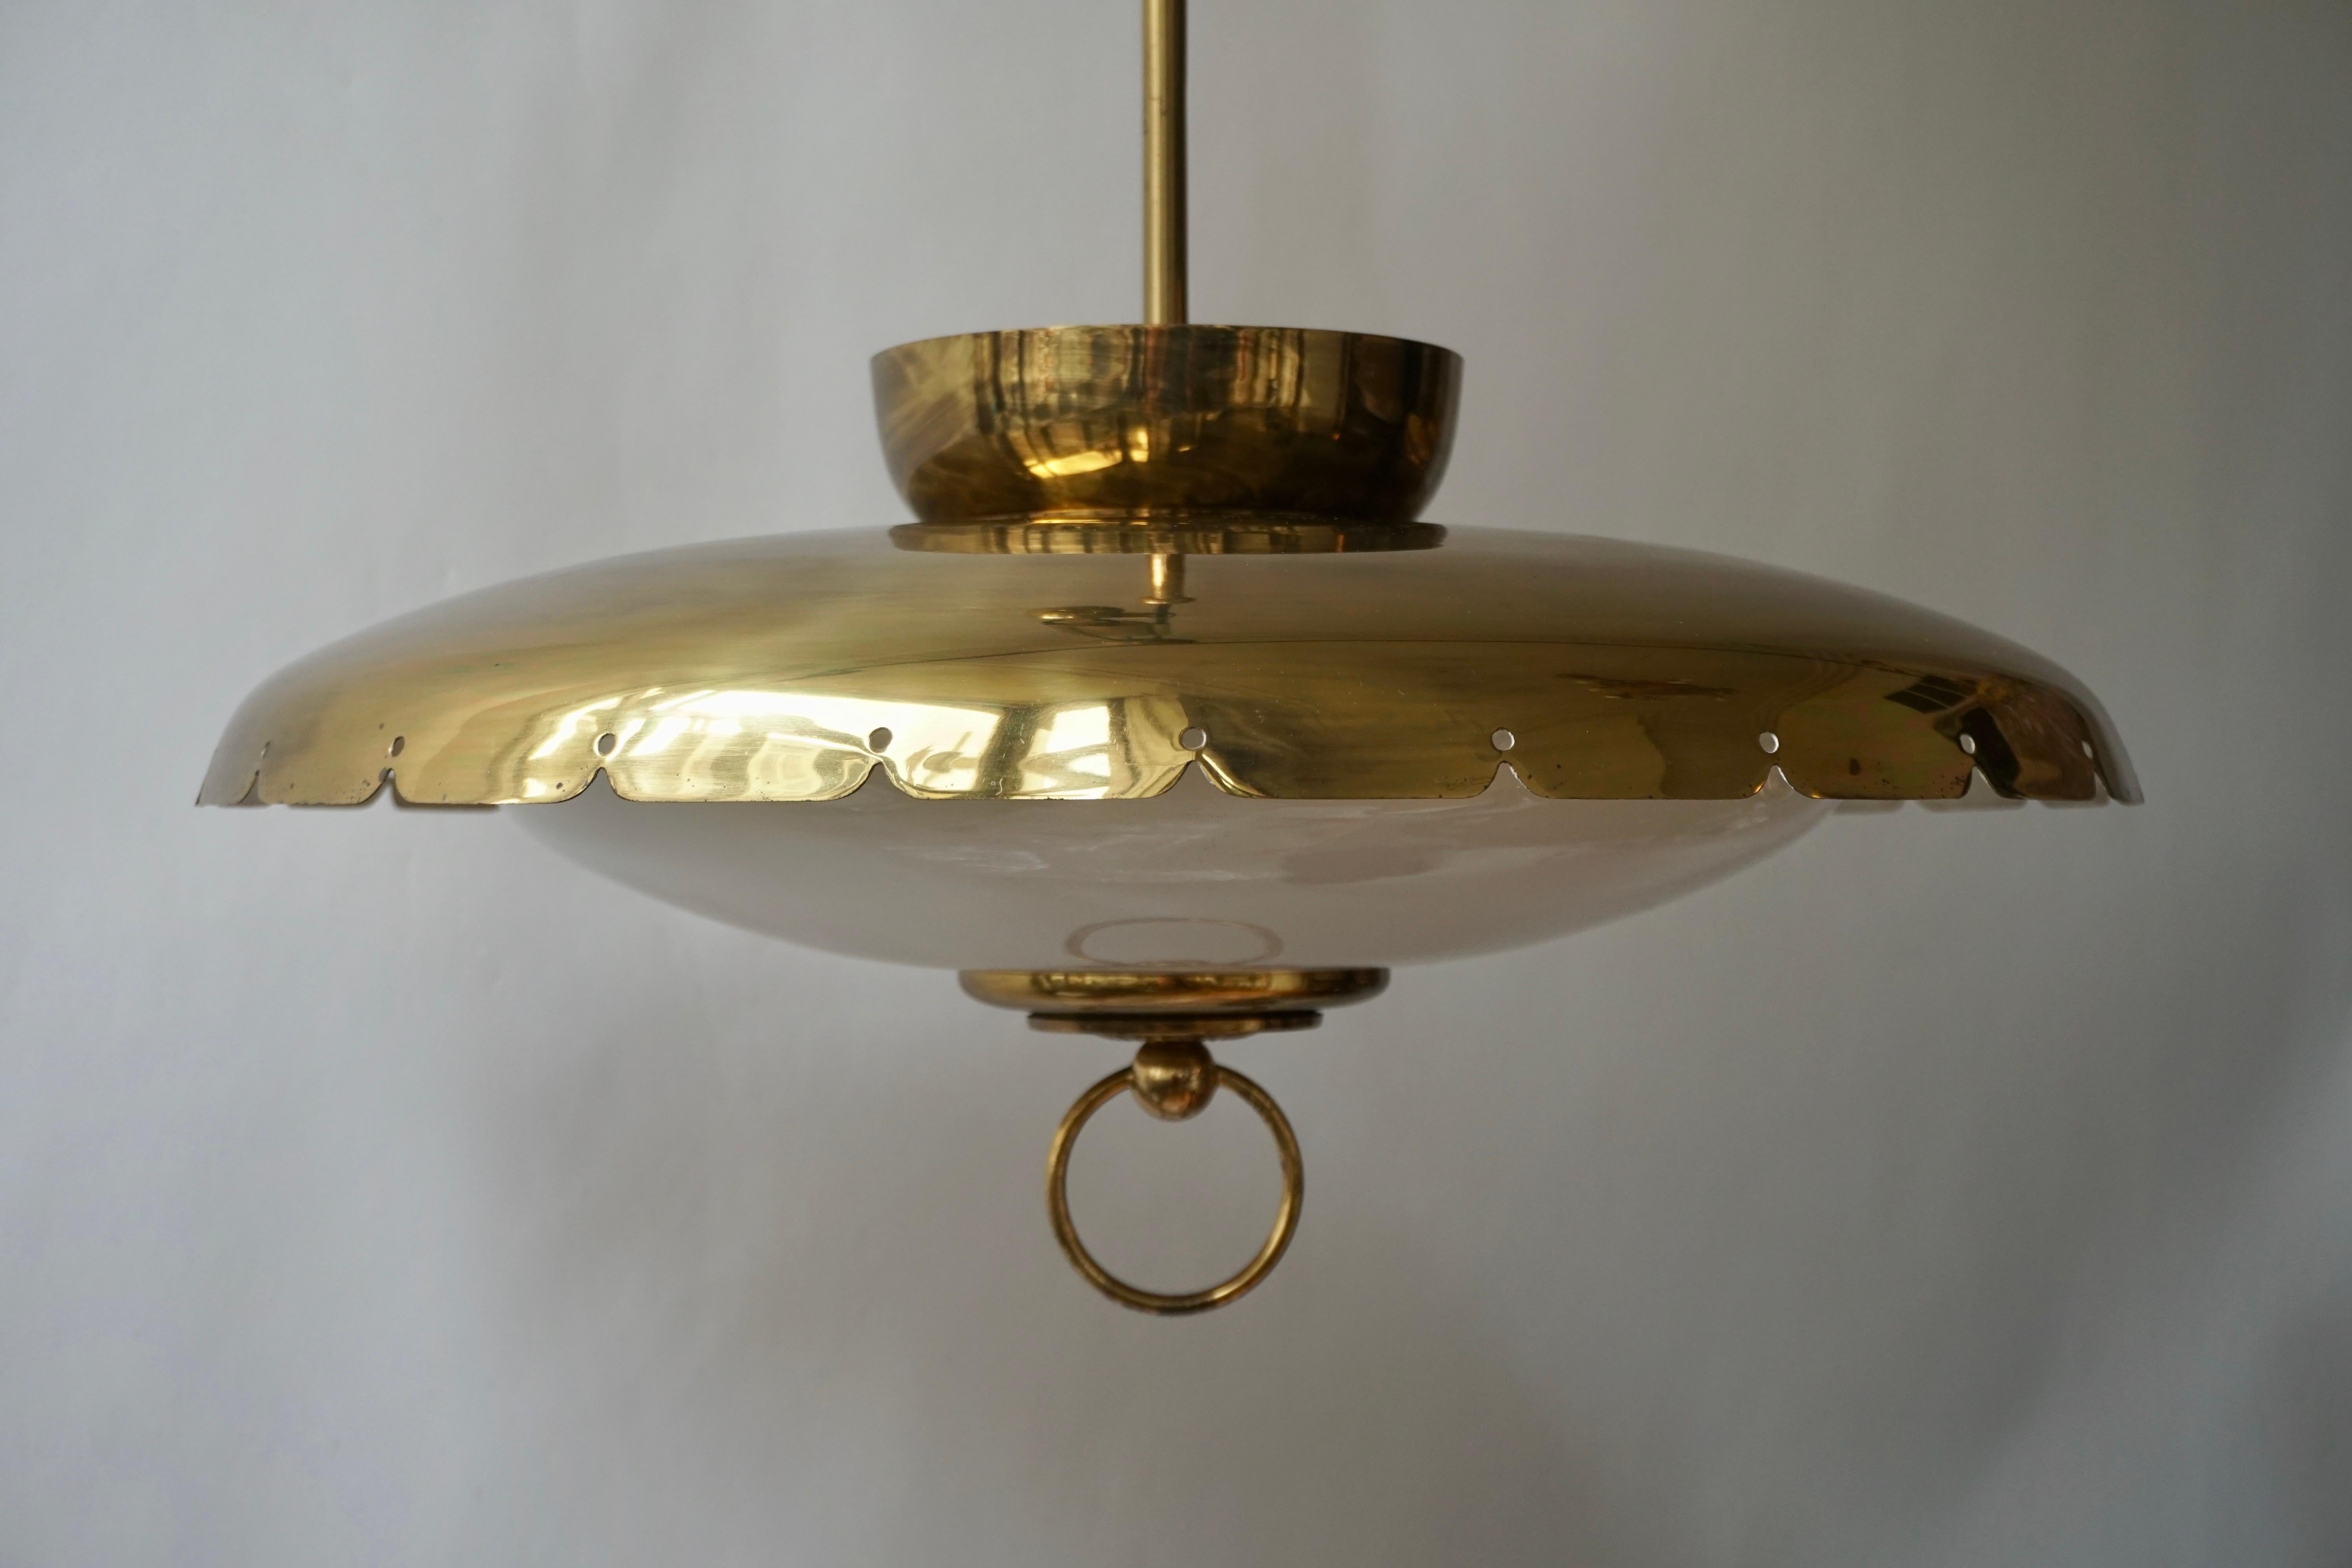 Rope Midcentury Adjustable Counterweight Brass and Glass Pendant Lamp, 1960s 1970s